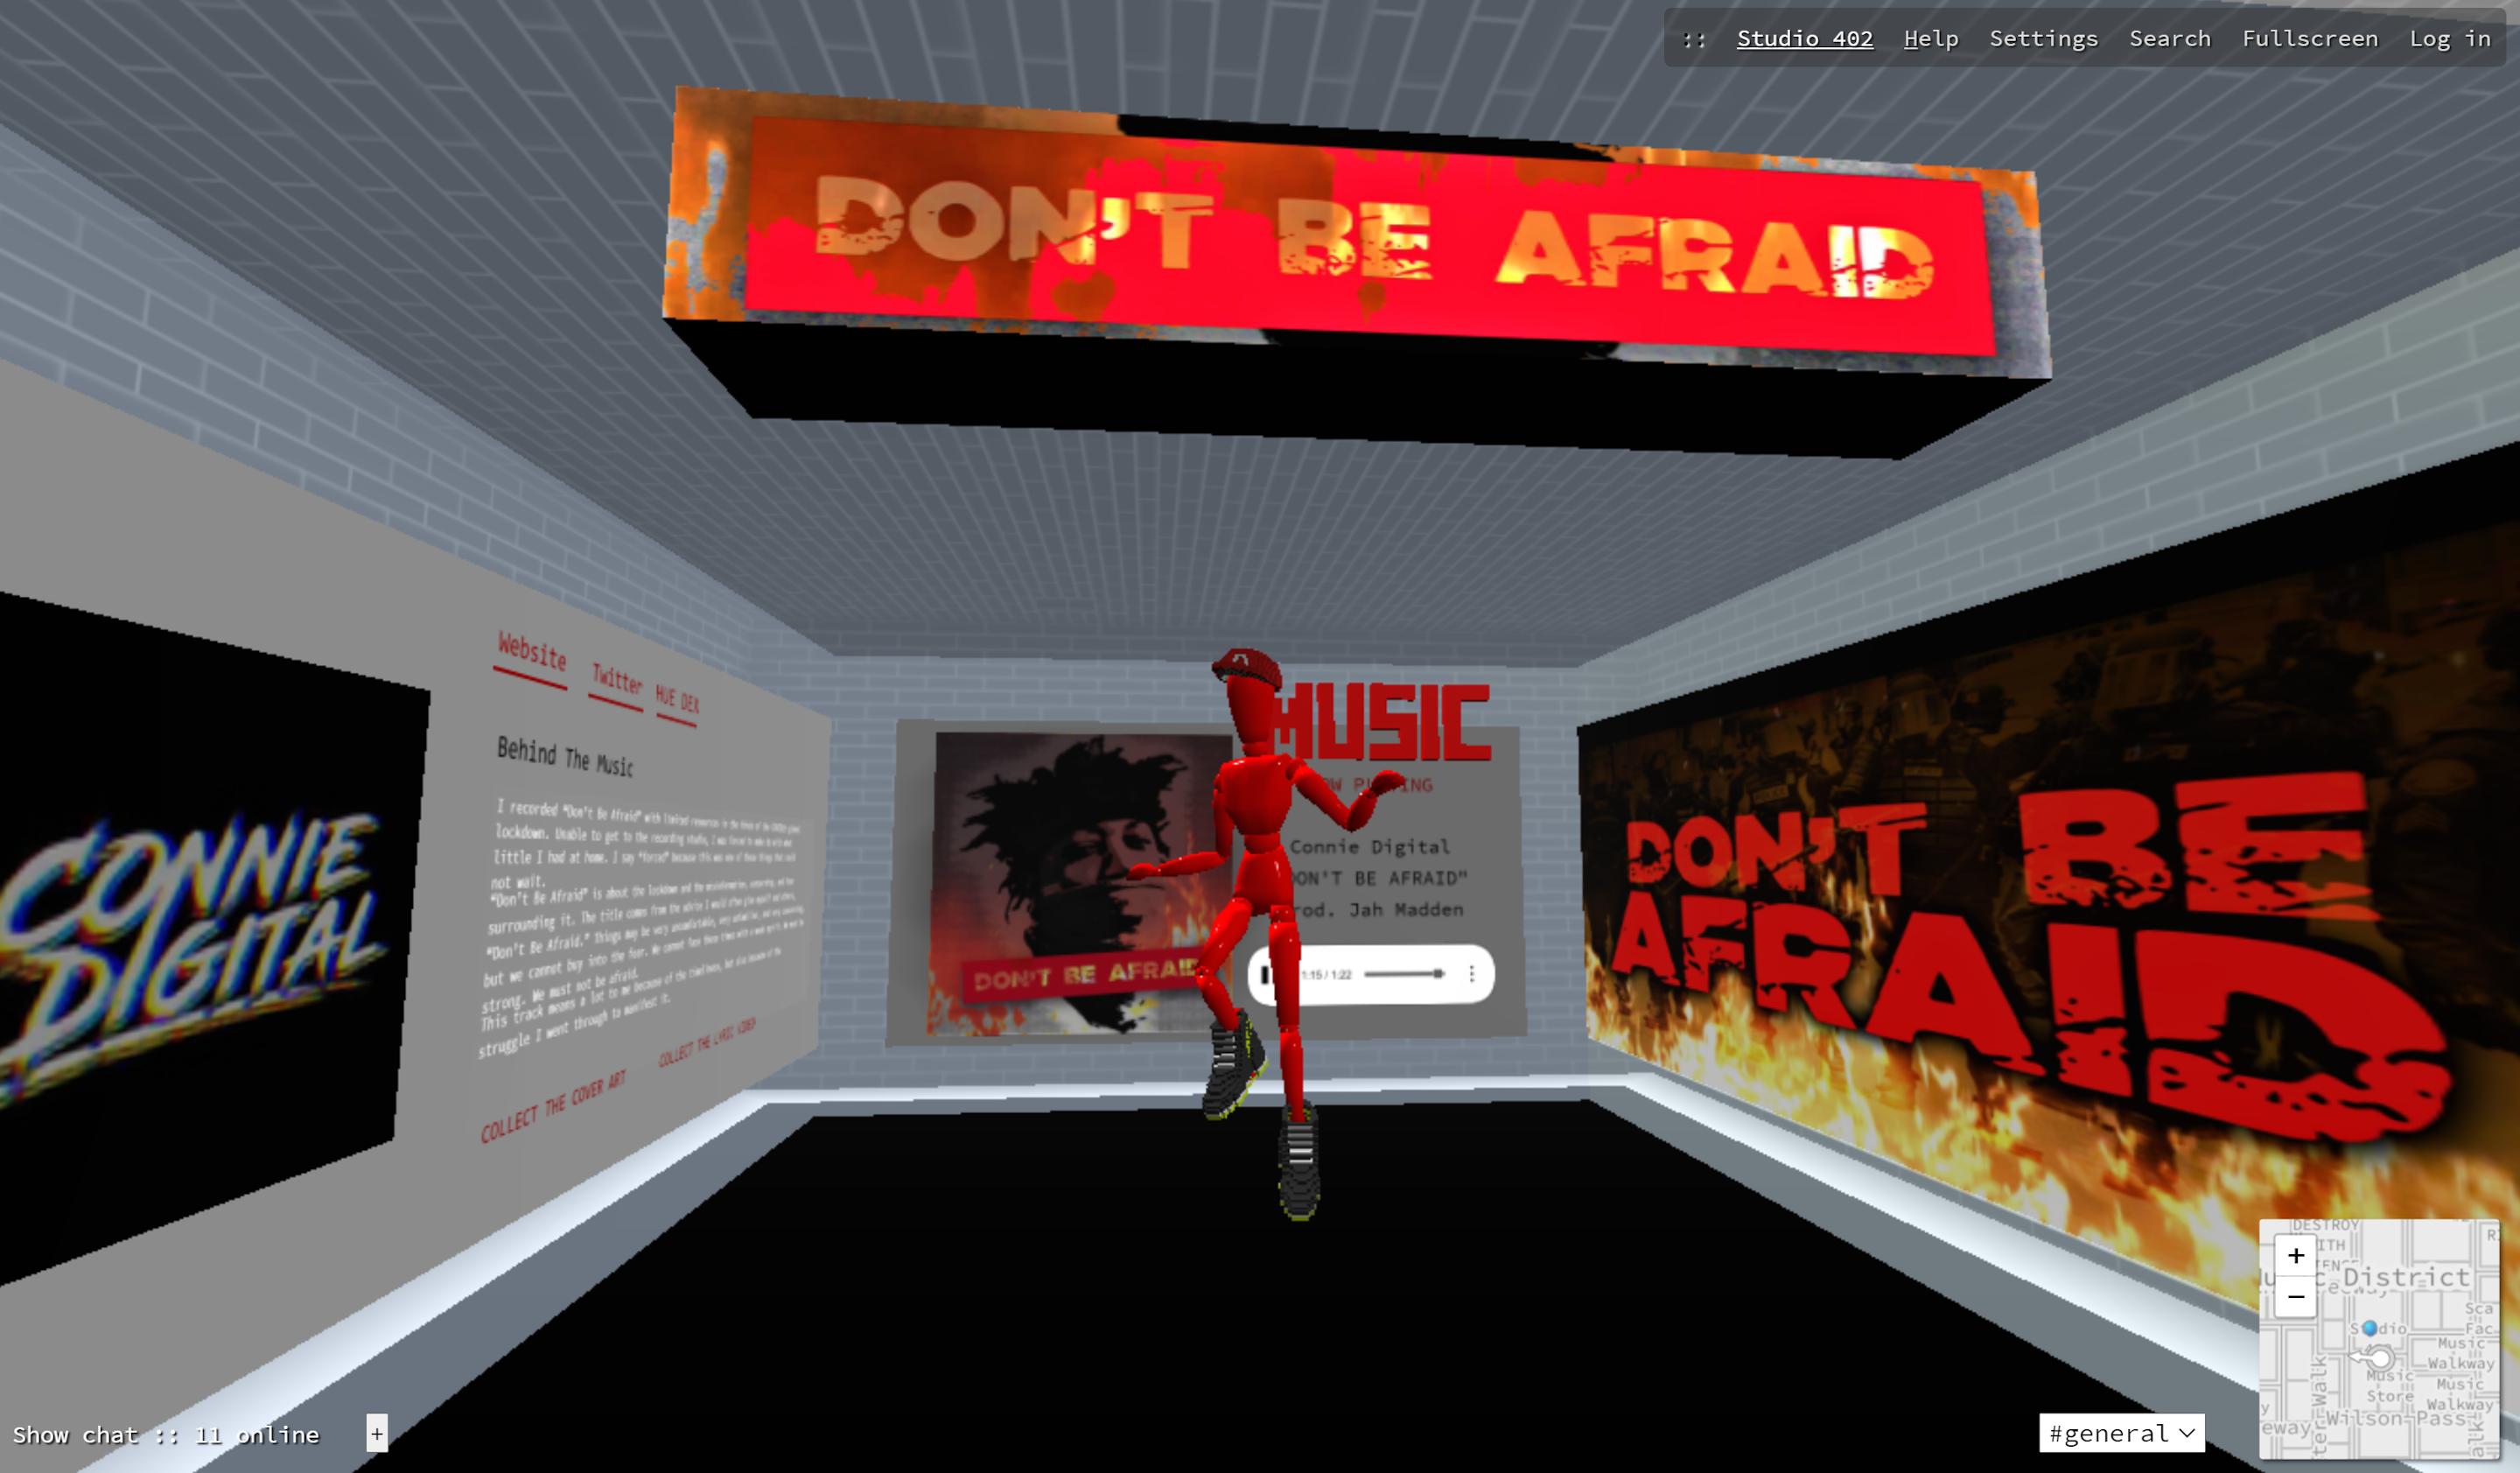 Connie Digital_Dont Be Afraid_NFT Collection 2020 Cryptovoxels